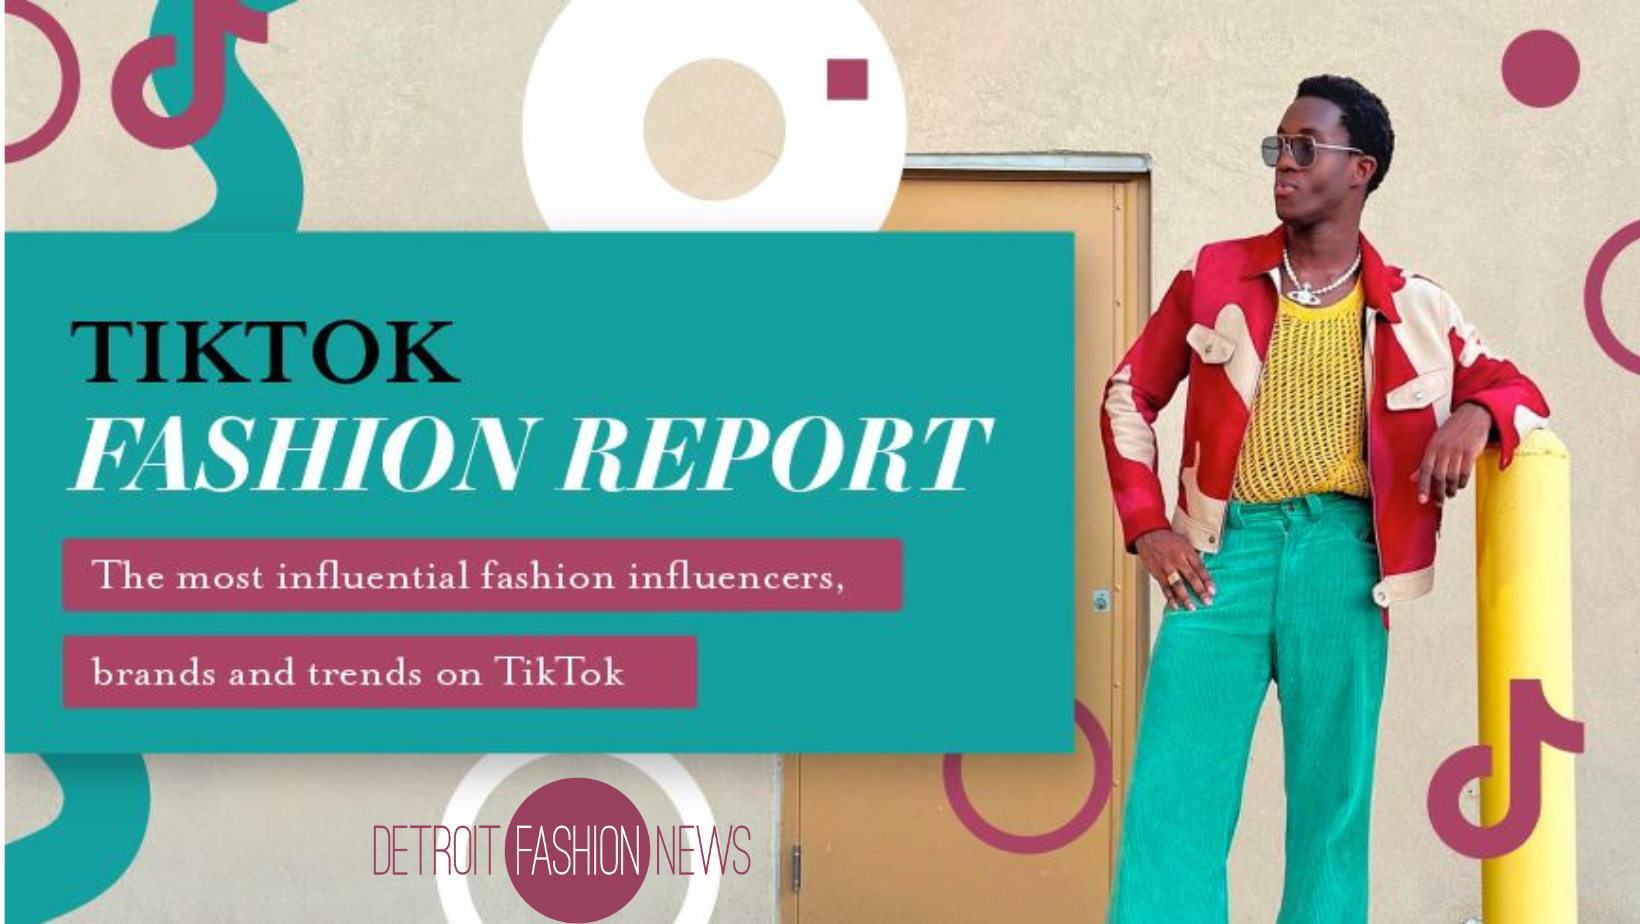 How TikTok took over fashion trends and the rise of “TikTok couture” - Vox